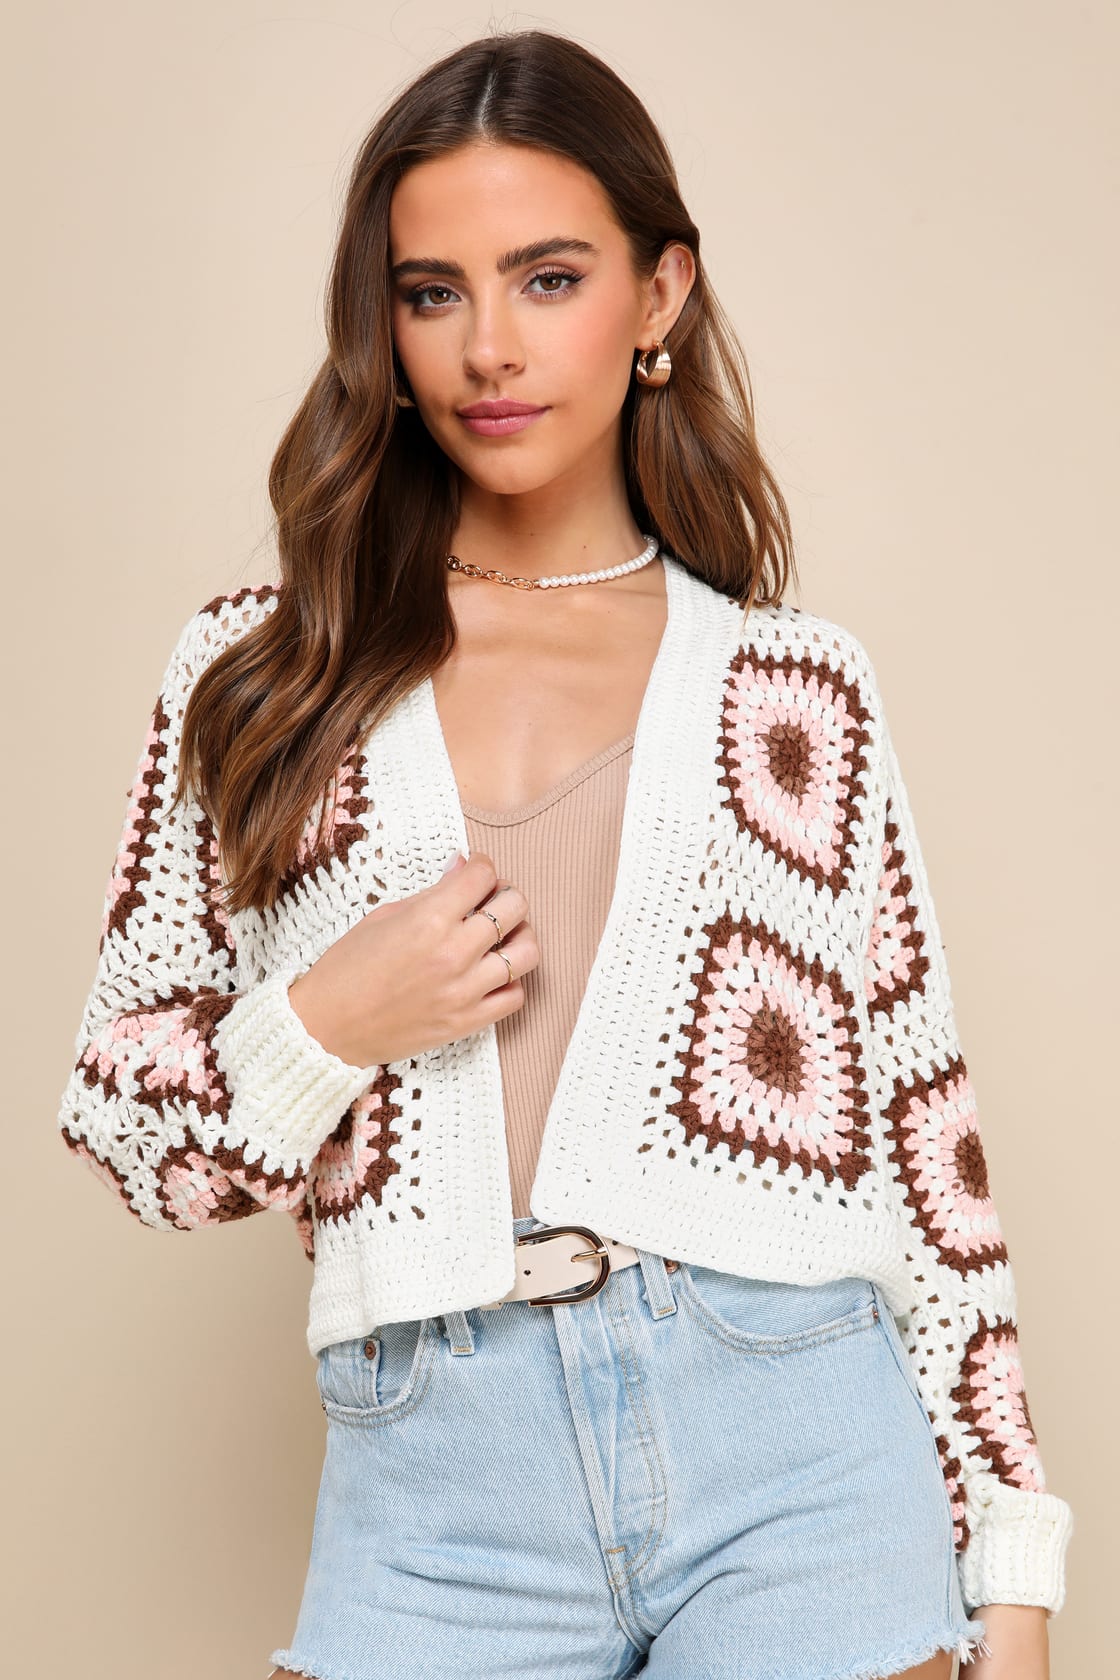 Cute Mentality Ivory Multi Crochet Open-Front Cardigan Sweater - gifts for mom from daughter